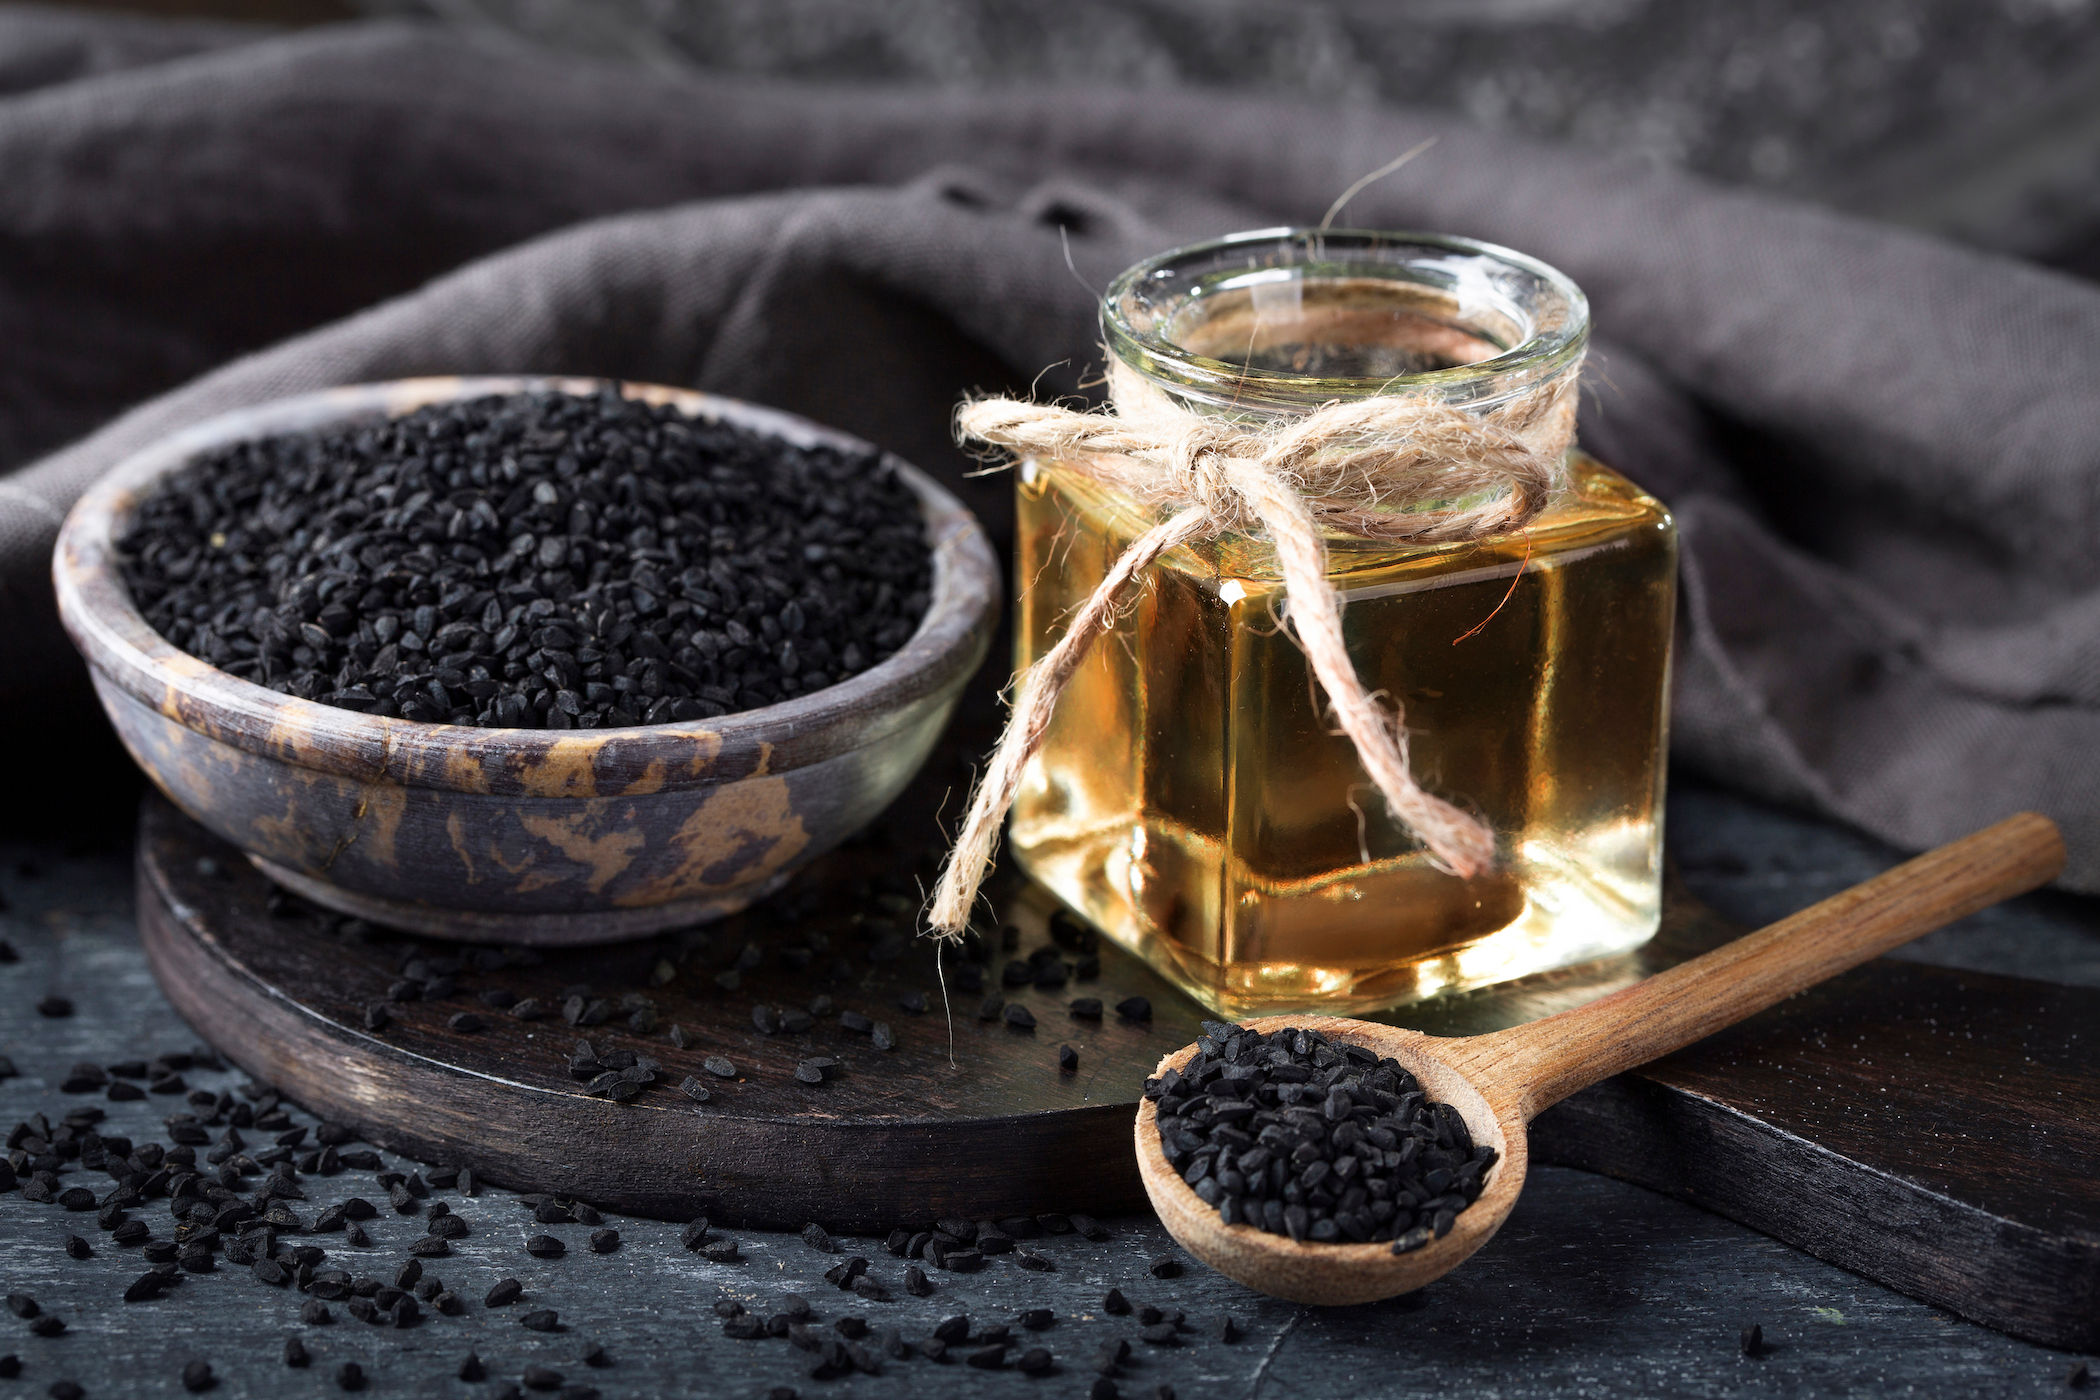 Black seed oil: Benefits, uses and side effects in beauty products